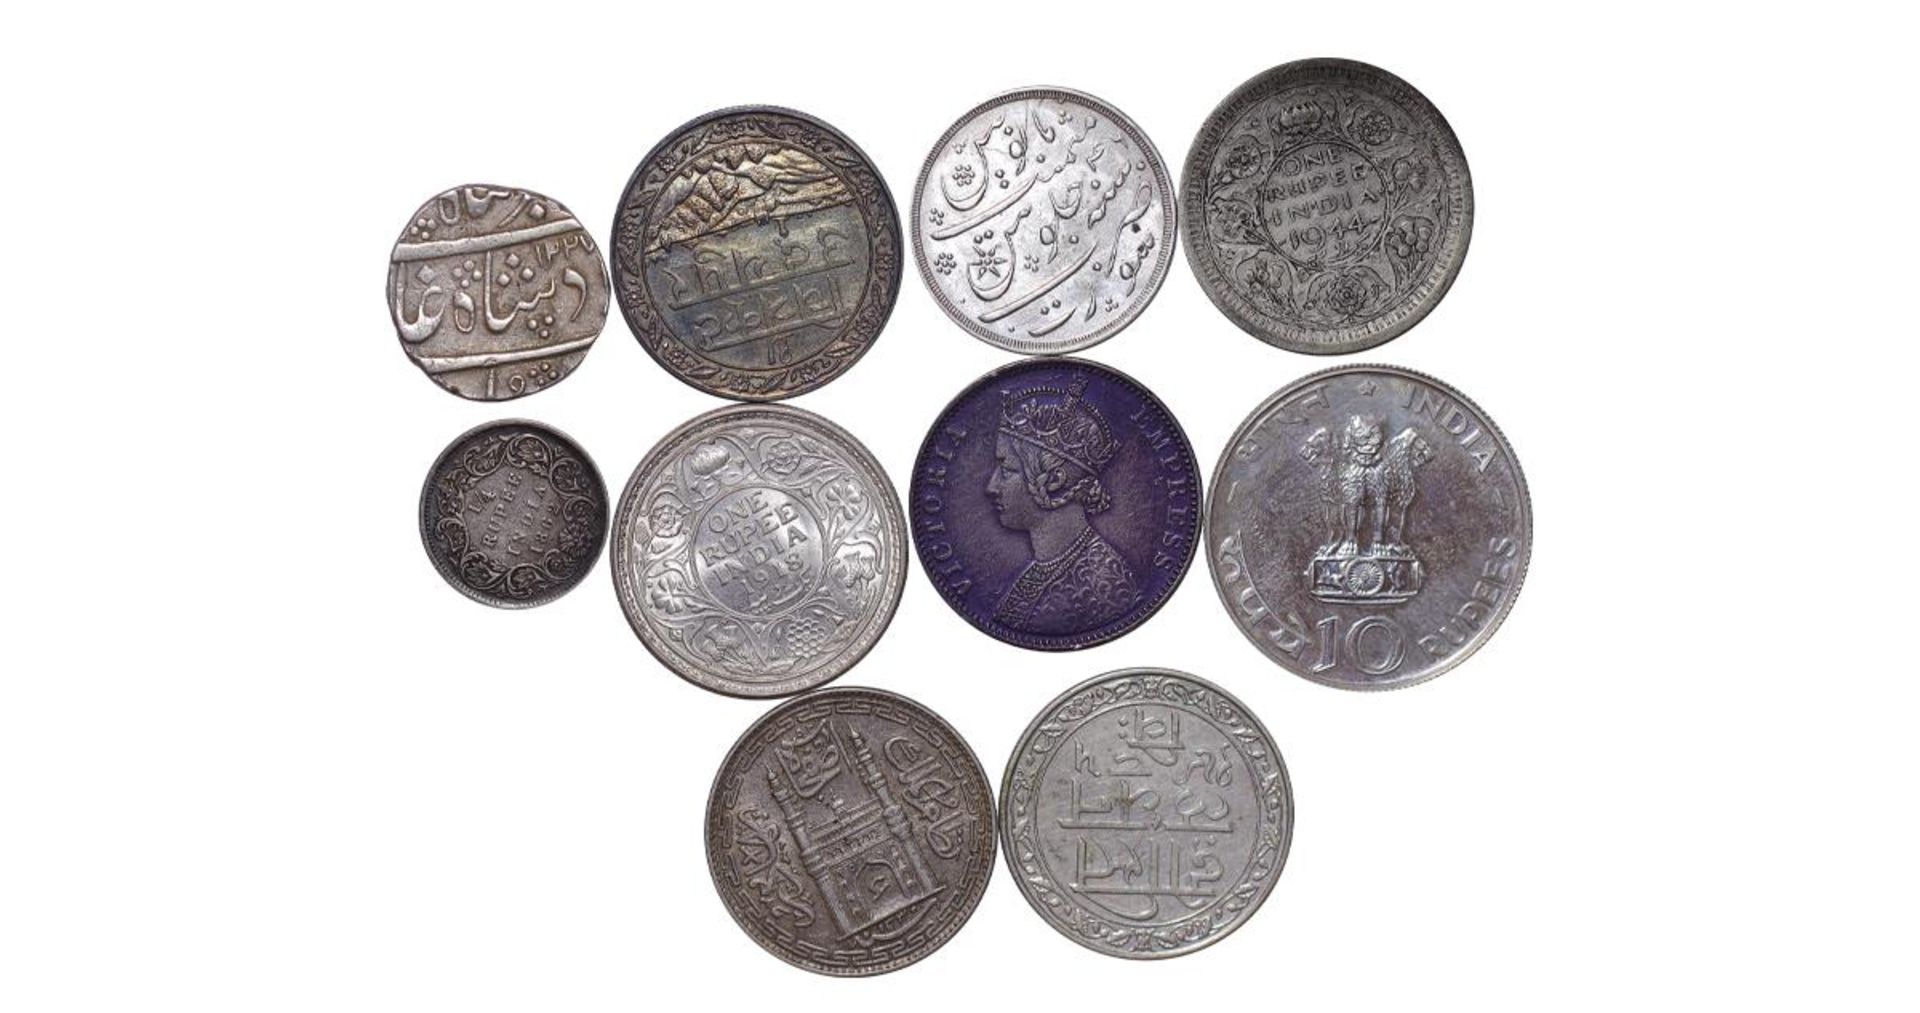  Collection of 10 Coins: Bombay Presidency, 1 Rupee, 1215 (1832) year,Princely state of Hyderabad, 1 - Image 2 of 2